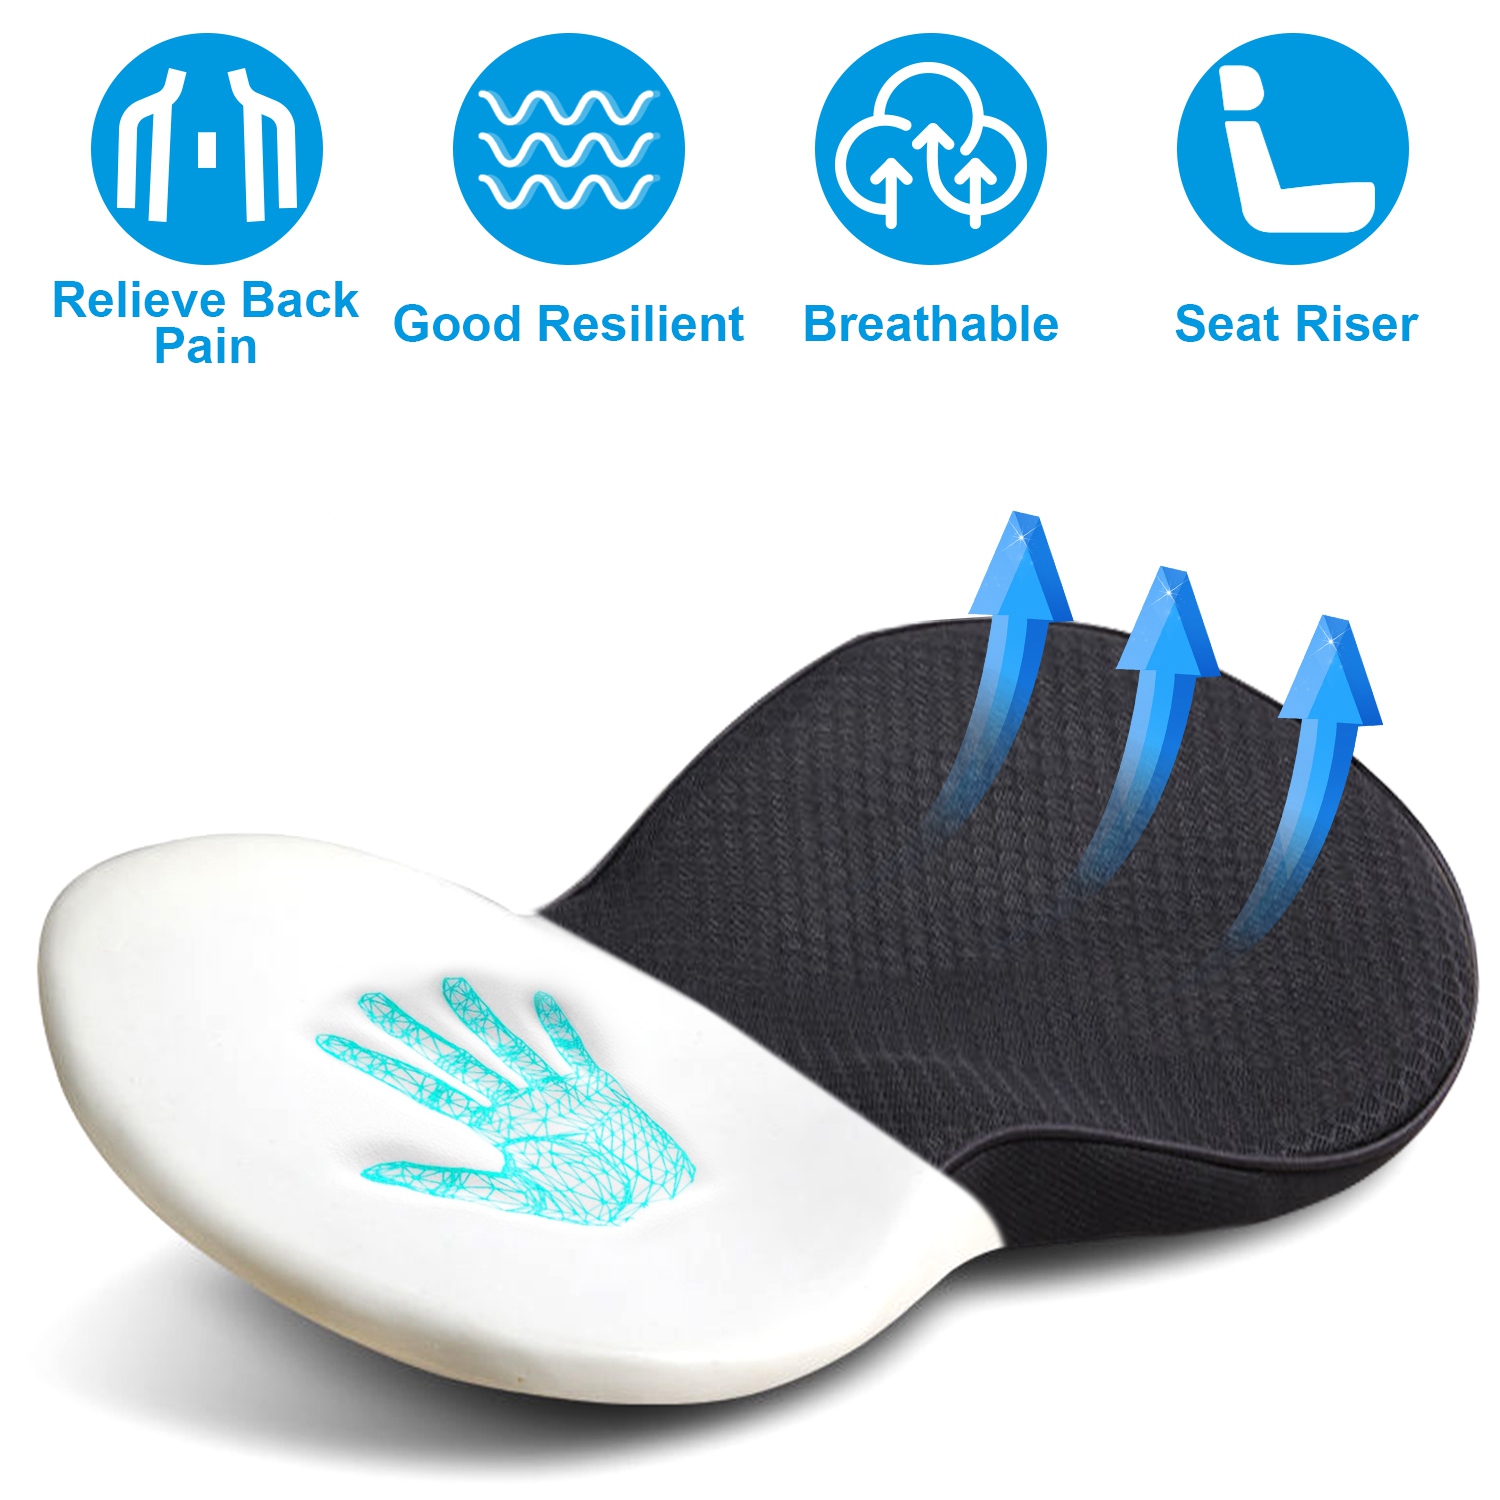 Seat Cushion, iMounTEK Office Chair Cushions Memory Foam Pad for All-Day Sitting Comfort - Ergonomic Coccyx, Back, Tailbone Pain Relief Pad Pillow Support for Car Seat, Desk Chair - image 1 of 9